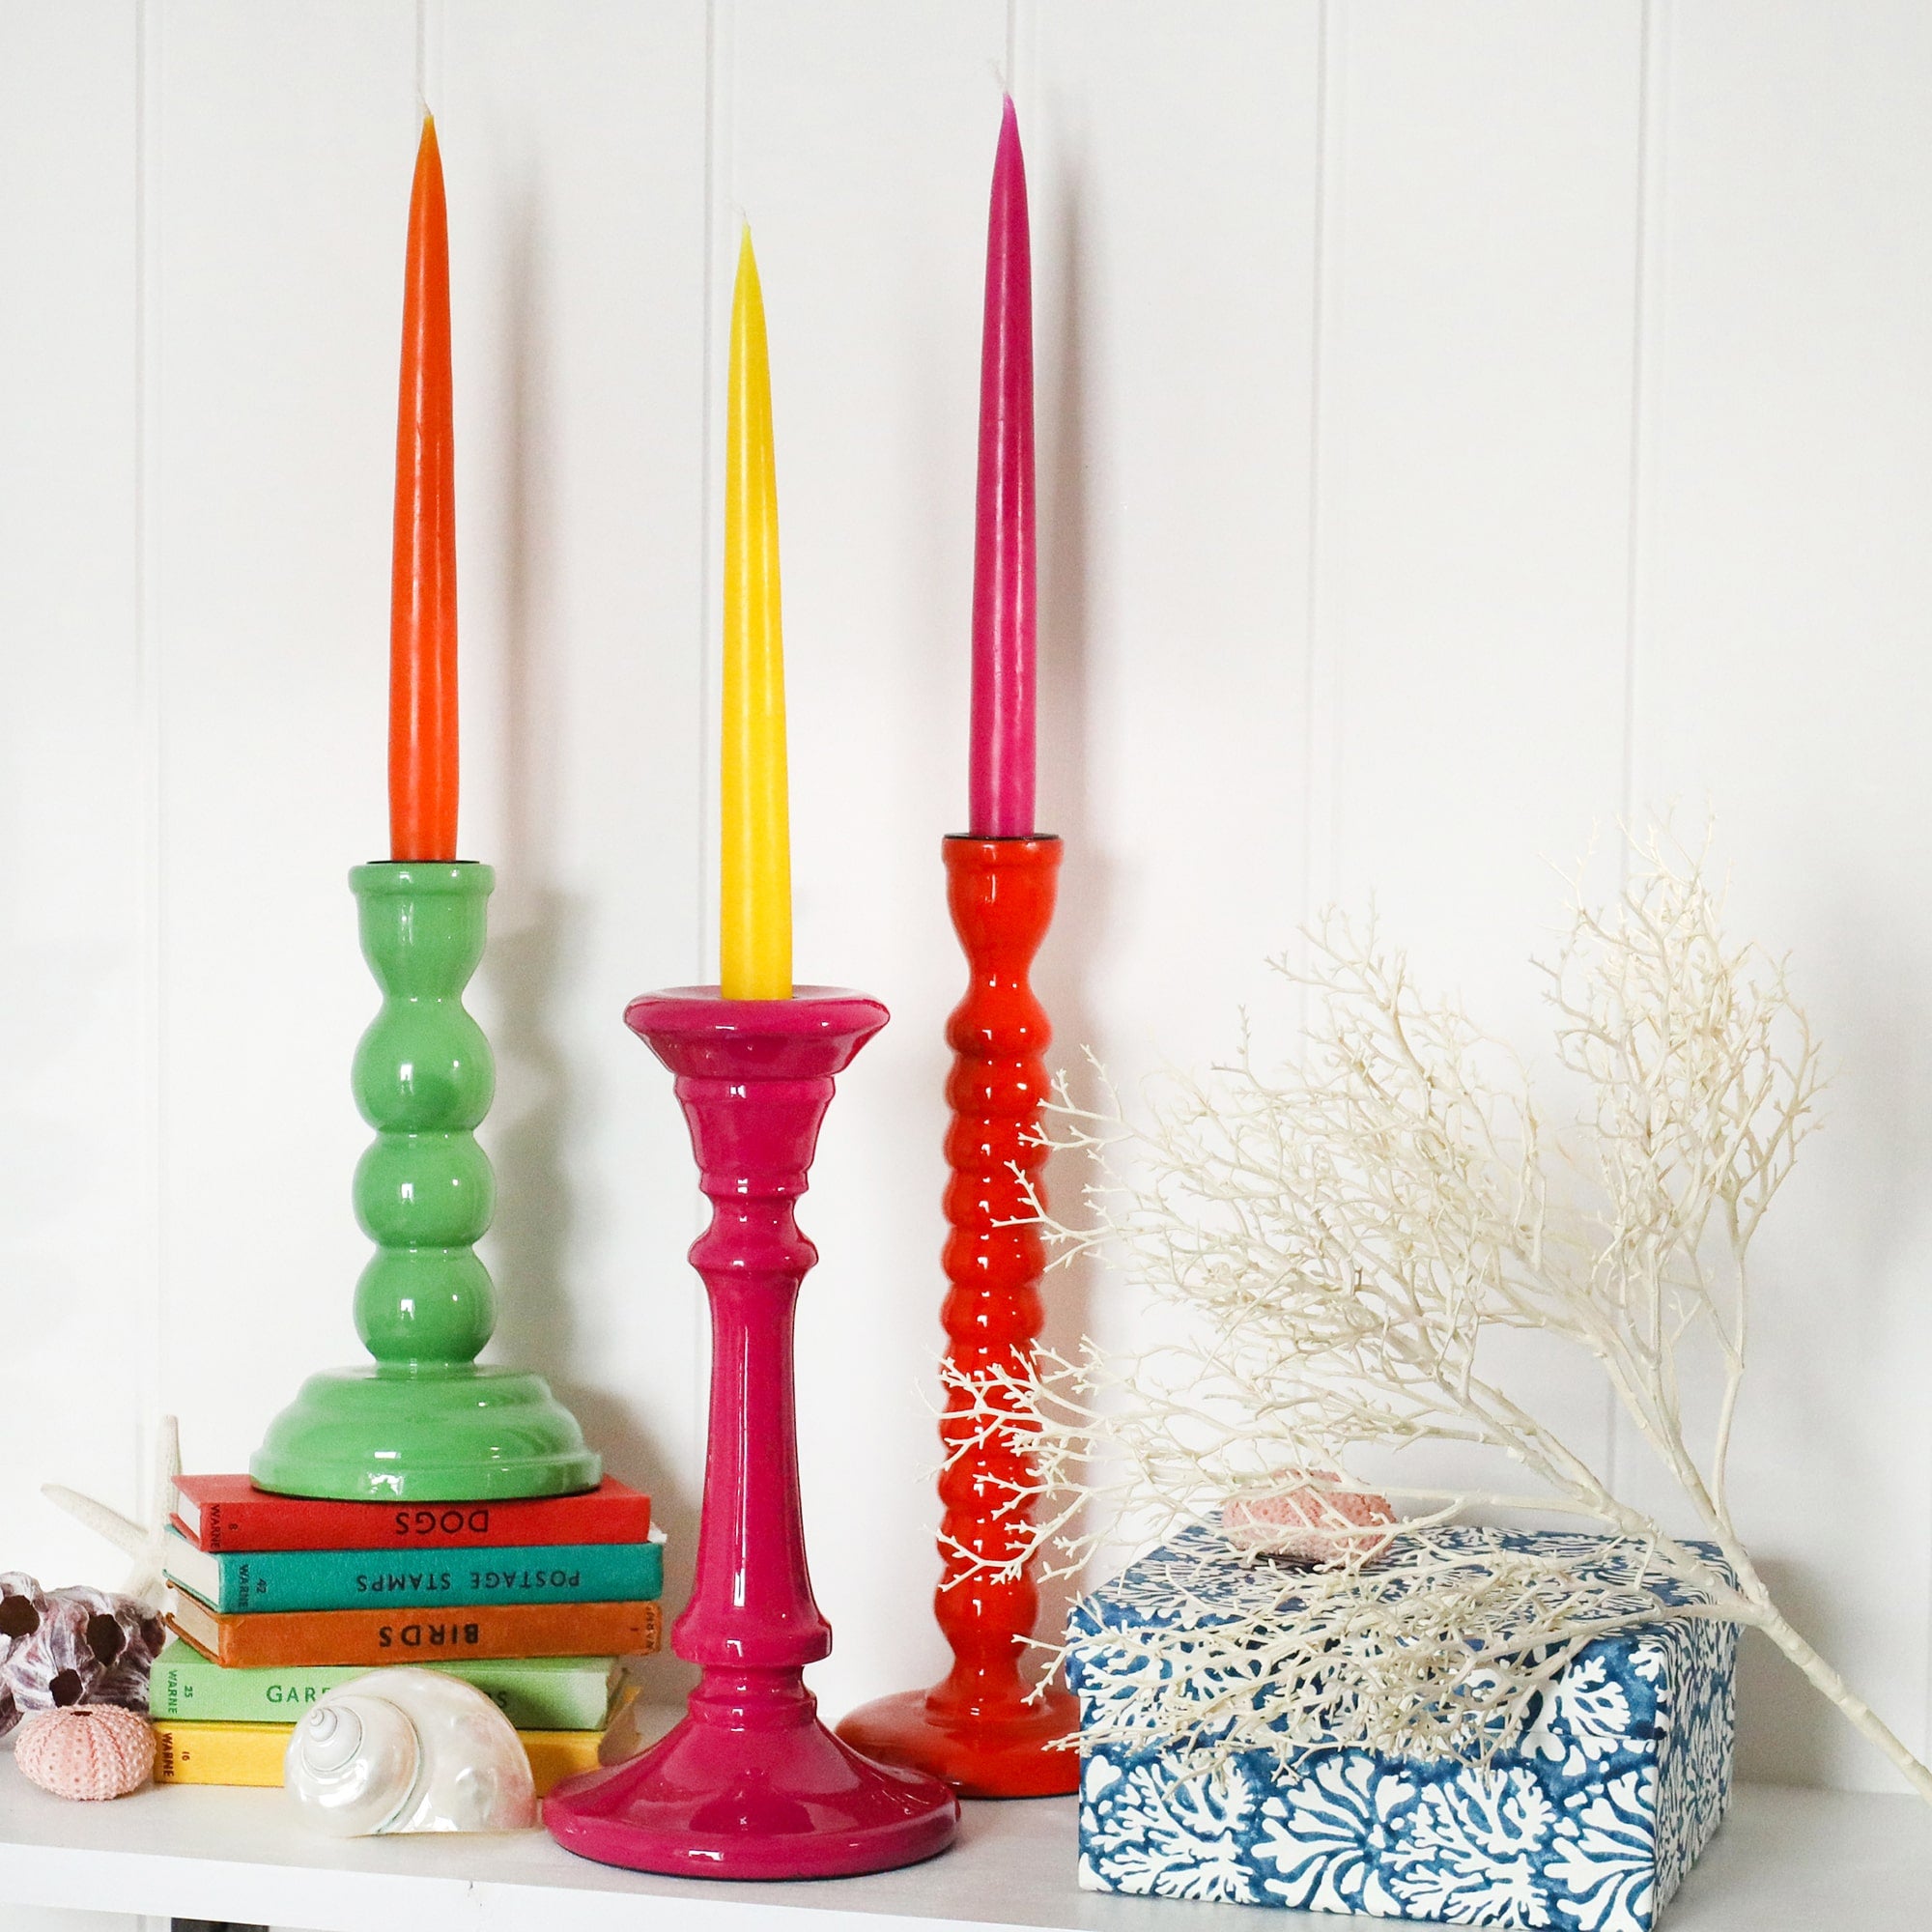 Candle holder placed on a couple of notebooks.Next to this is Fuschia Tidal candle holders.Both have contrasting candles in them,there are shells also in the picture